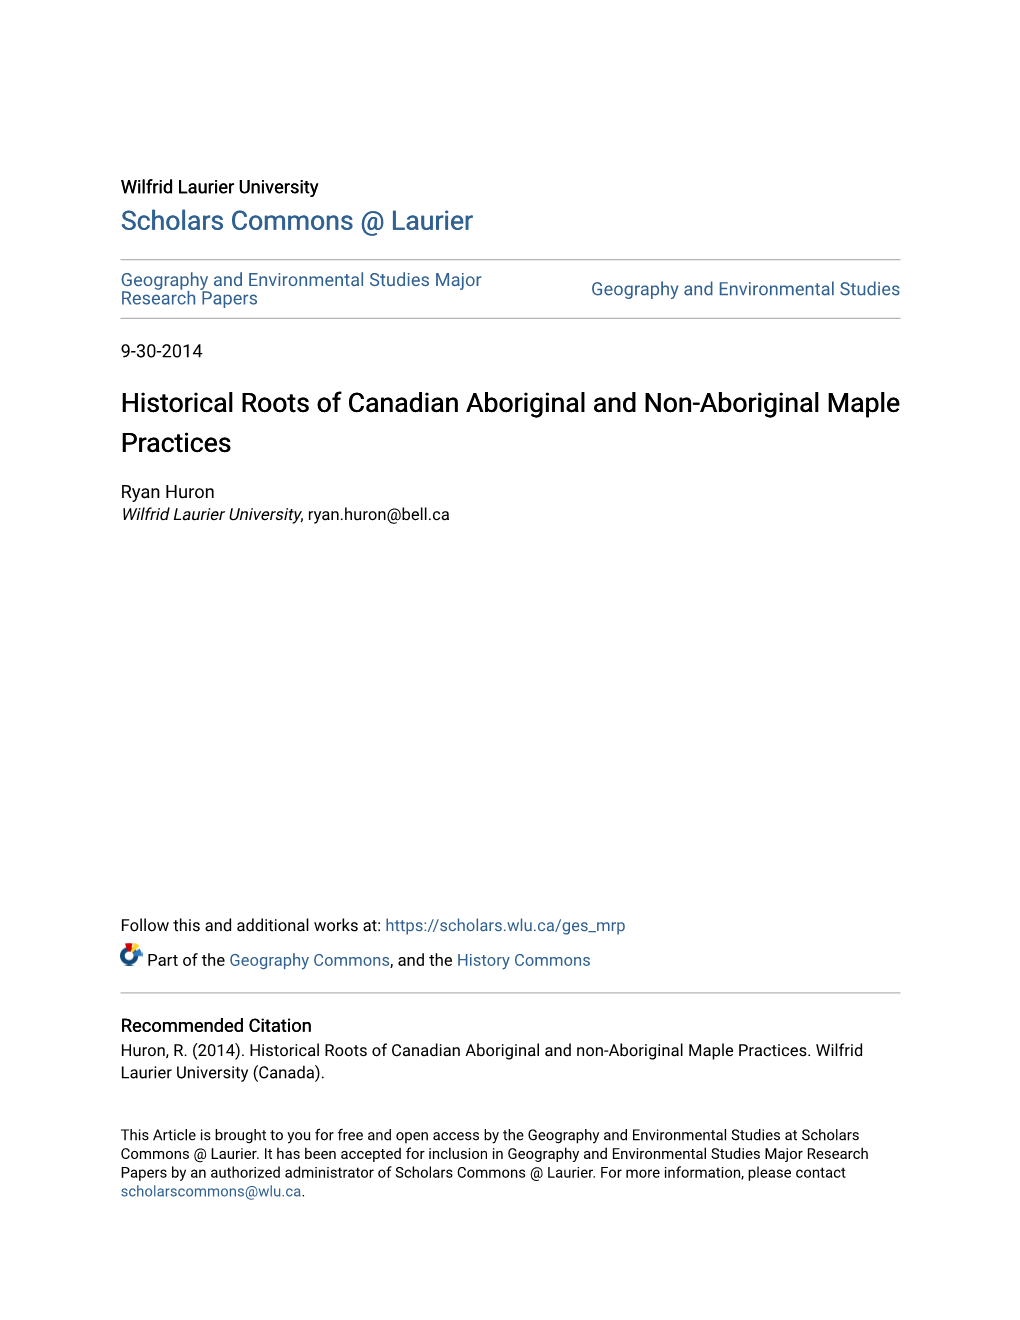 Historical Roots of Canadian Aboriginal and Non-Aboriginal Maple Practices